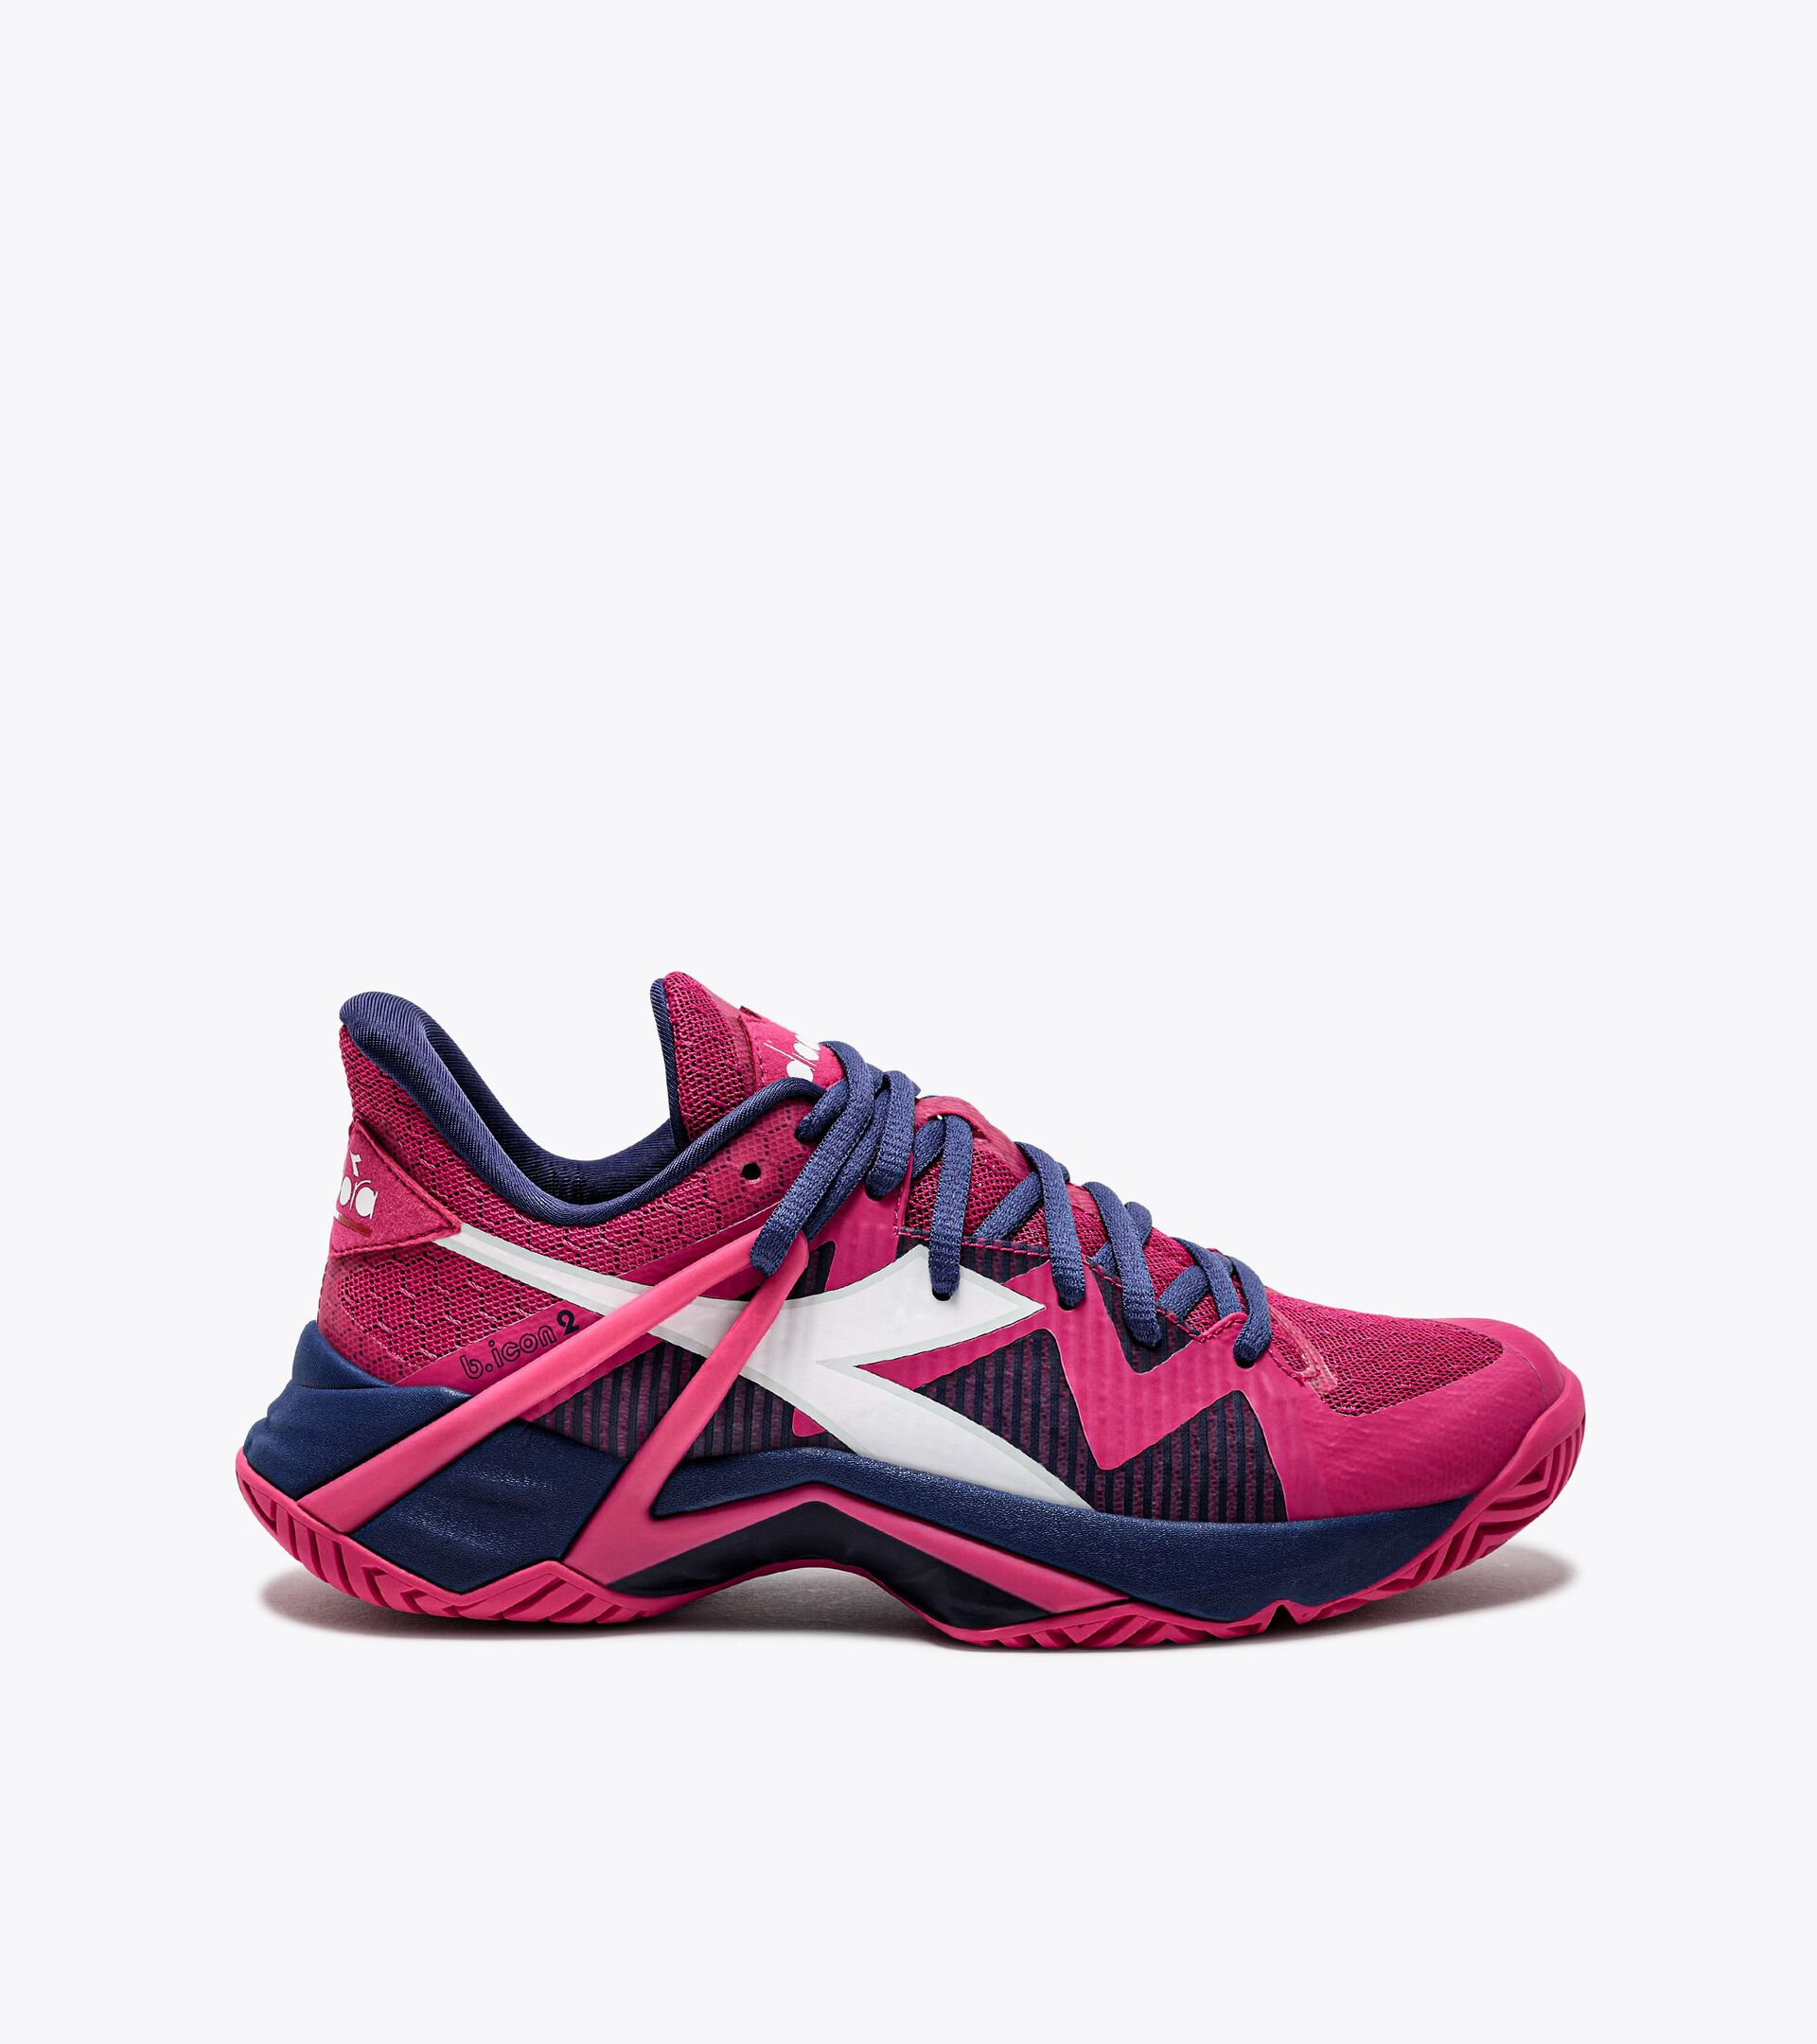 Tennis shoes for hard surfaces or clay courts - Women B.ICON 2 W AG ROSA SCHAFGARBE/WSS/BLAUDRUCK - Diadora